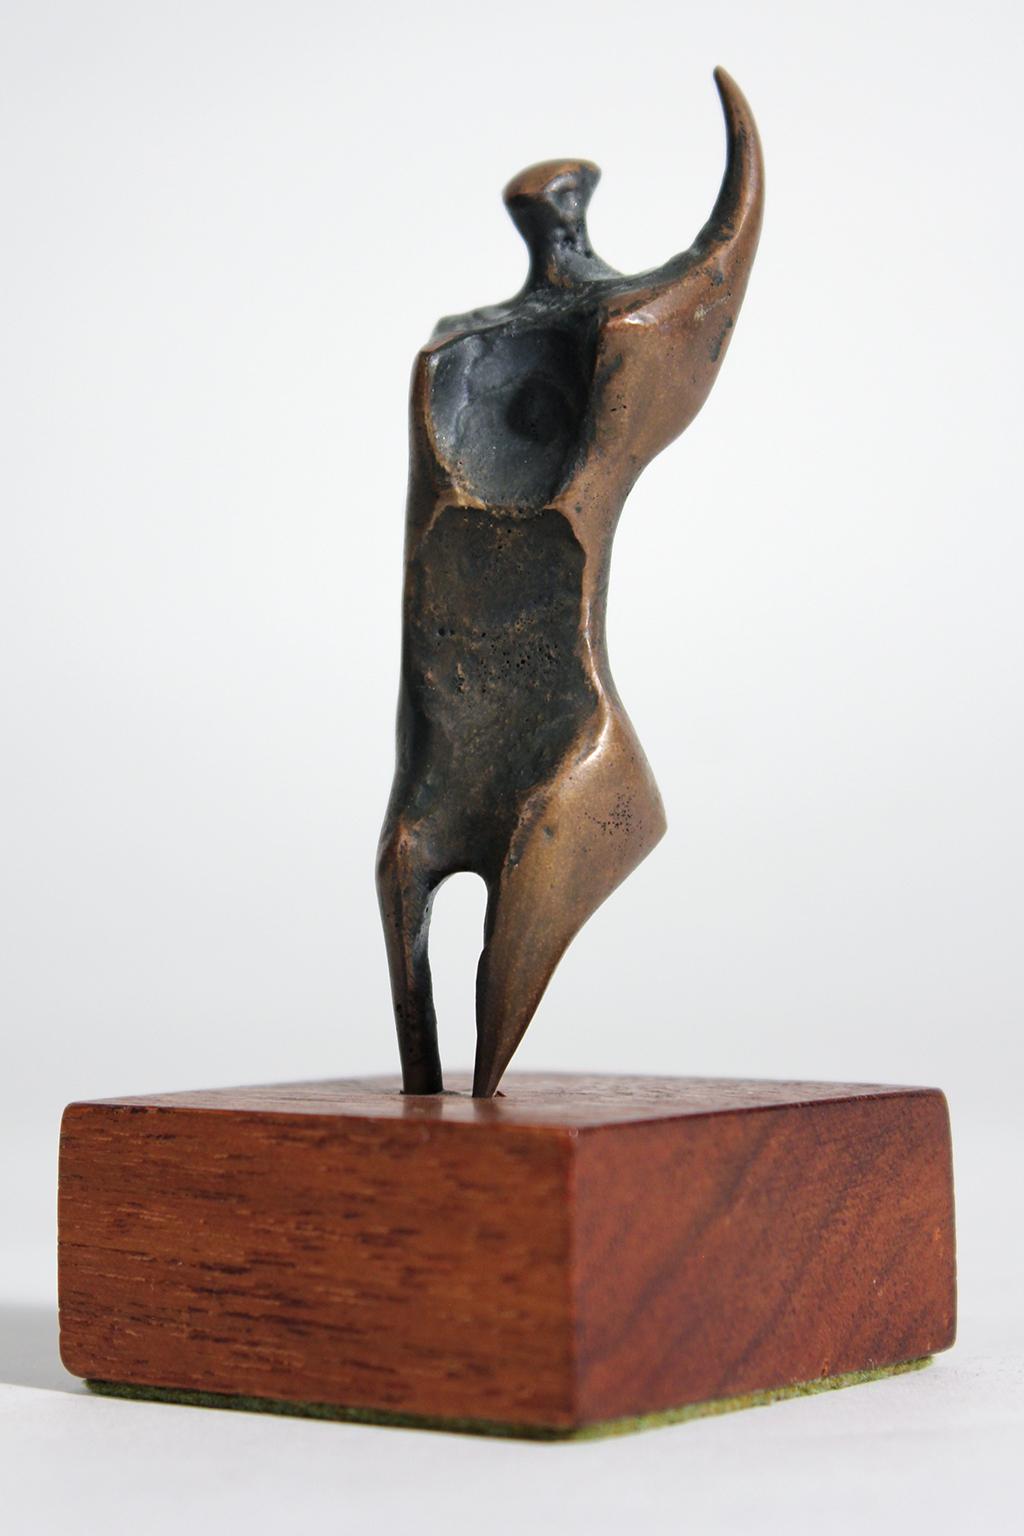 Great Jack Boyd bronze abstract modernist sculpture on original walnut base. Abstract form and a wonderful dark patina. Standing on its original mahogany wood base and is signed on the back as seen in the photos. Measures: 4